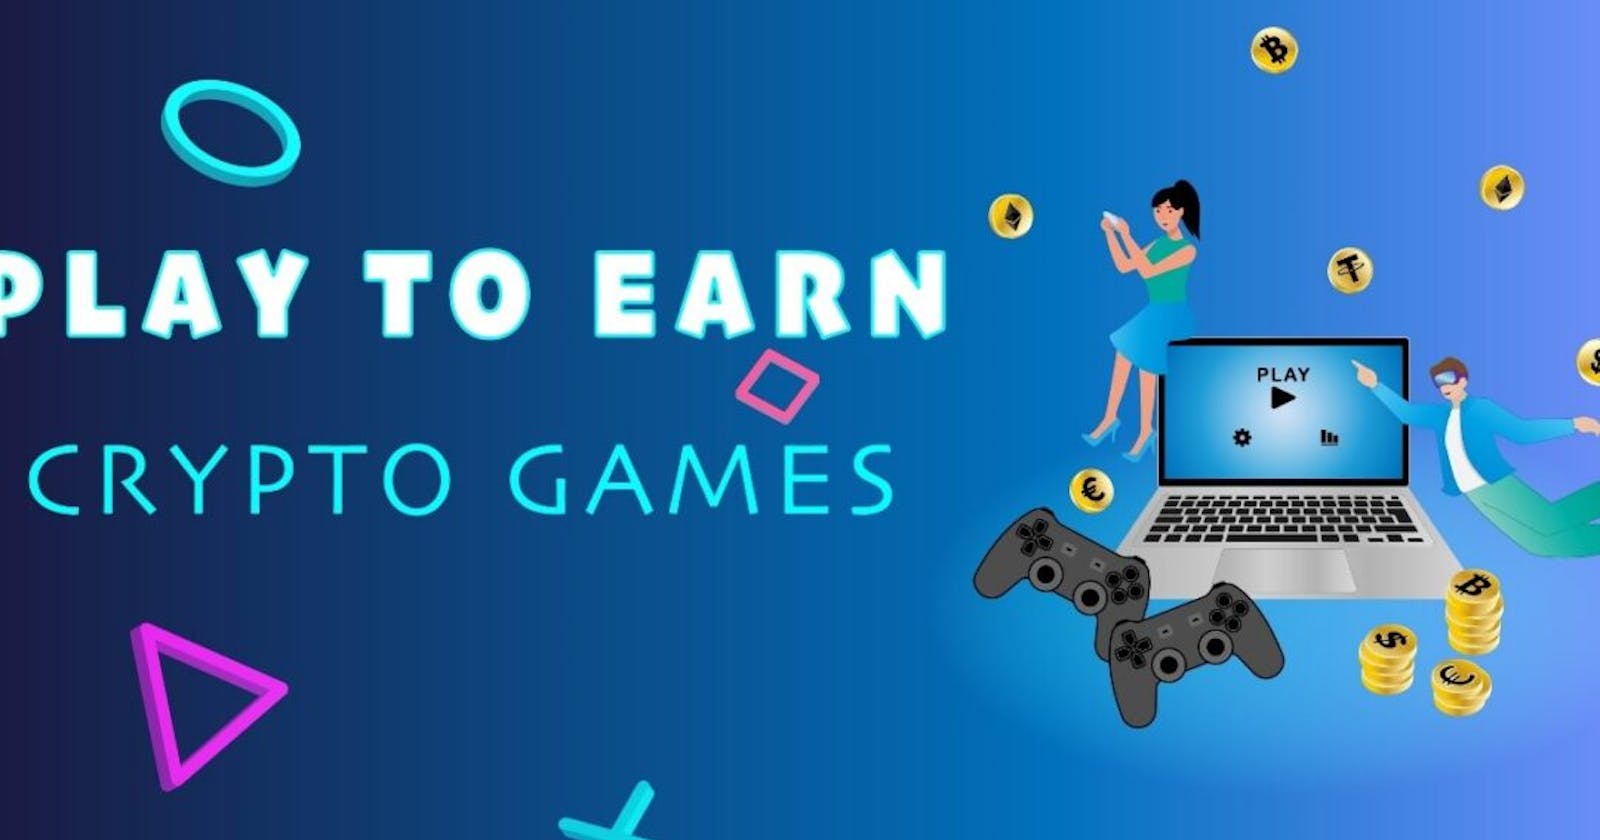 Play-to-earn crypto games: Scam or innovative idea